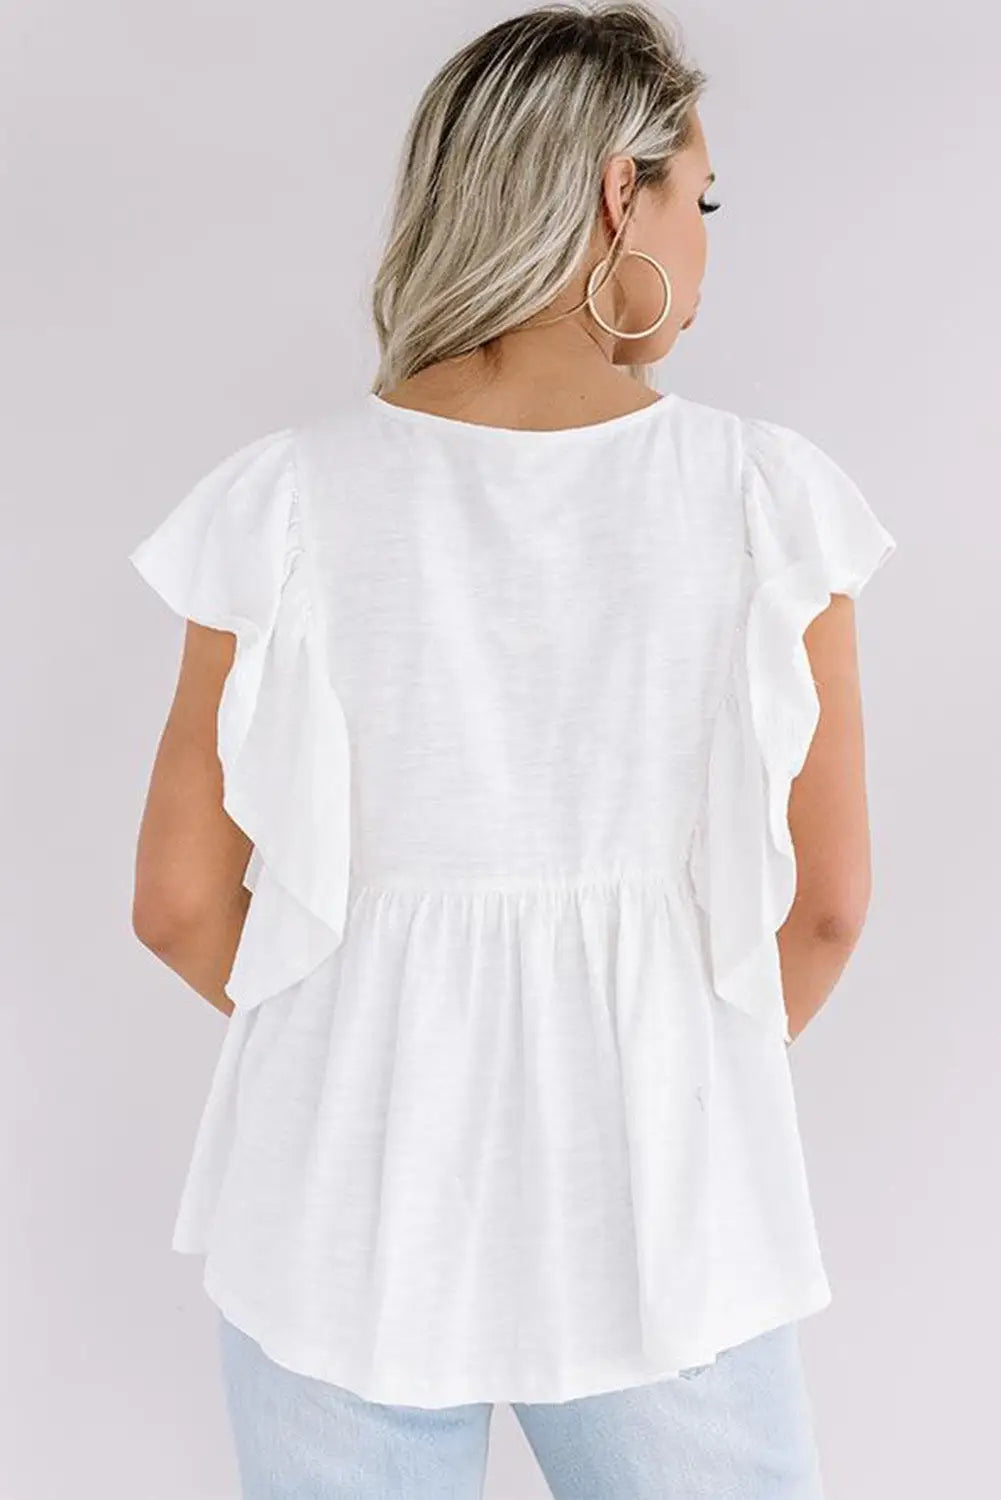 White floral embroidered ruffled lace-up v neck top - t-shirts